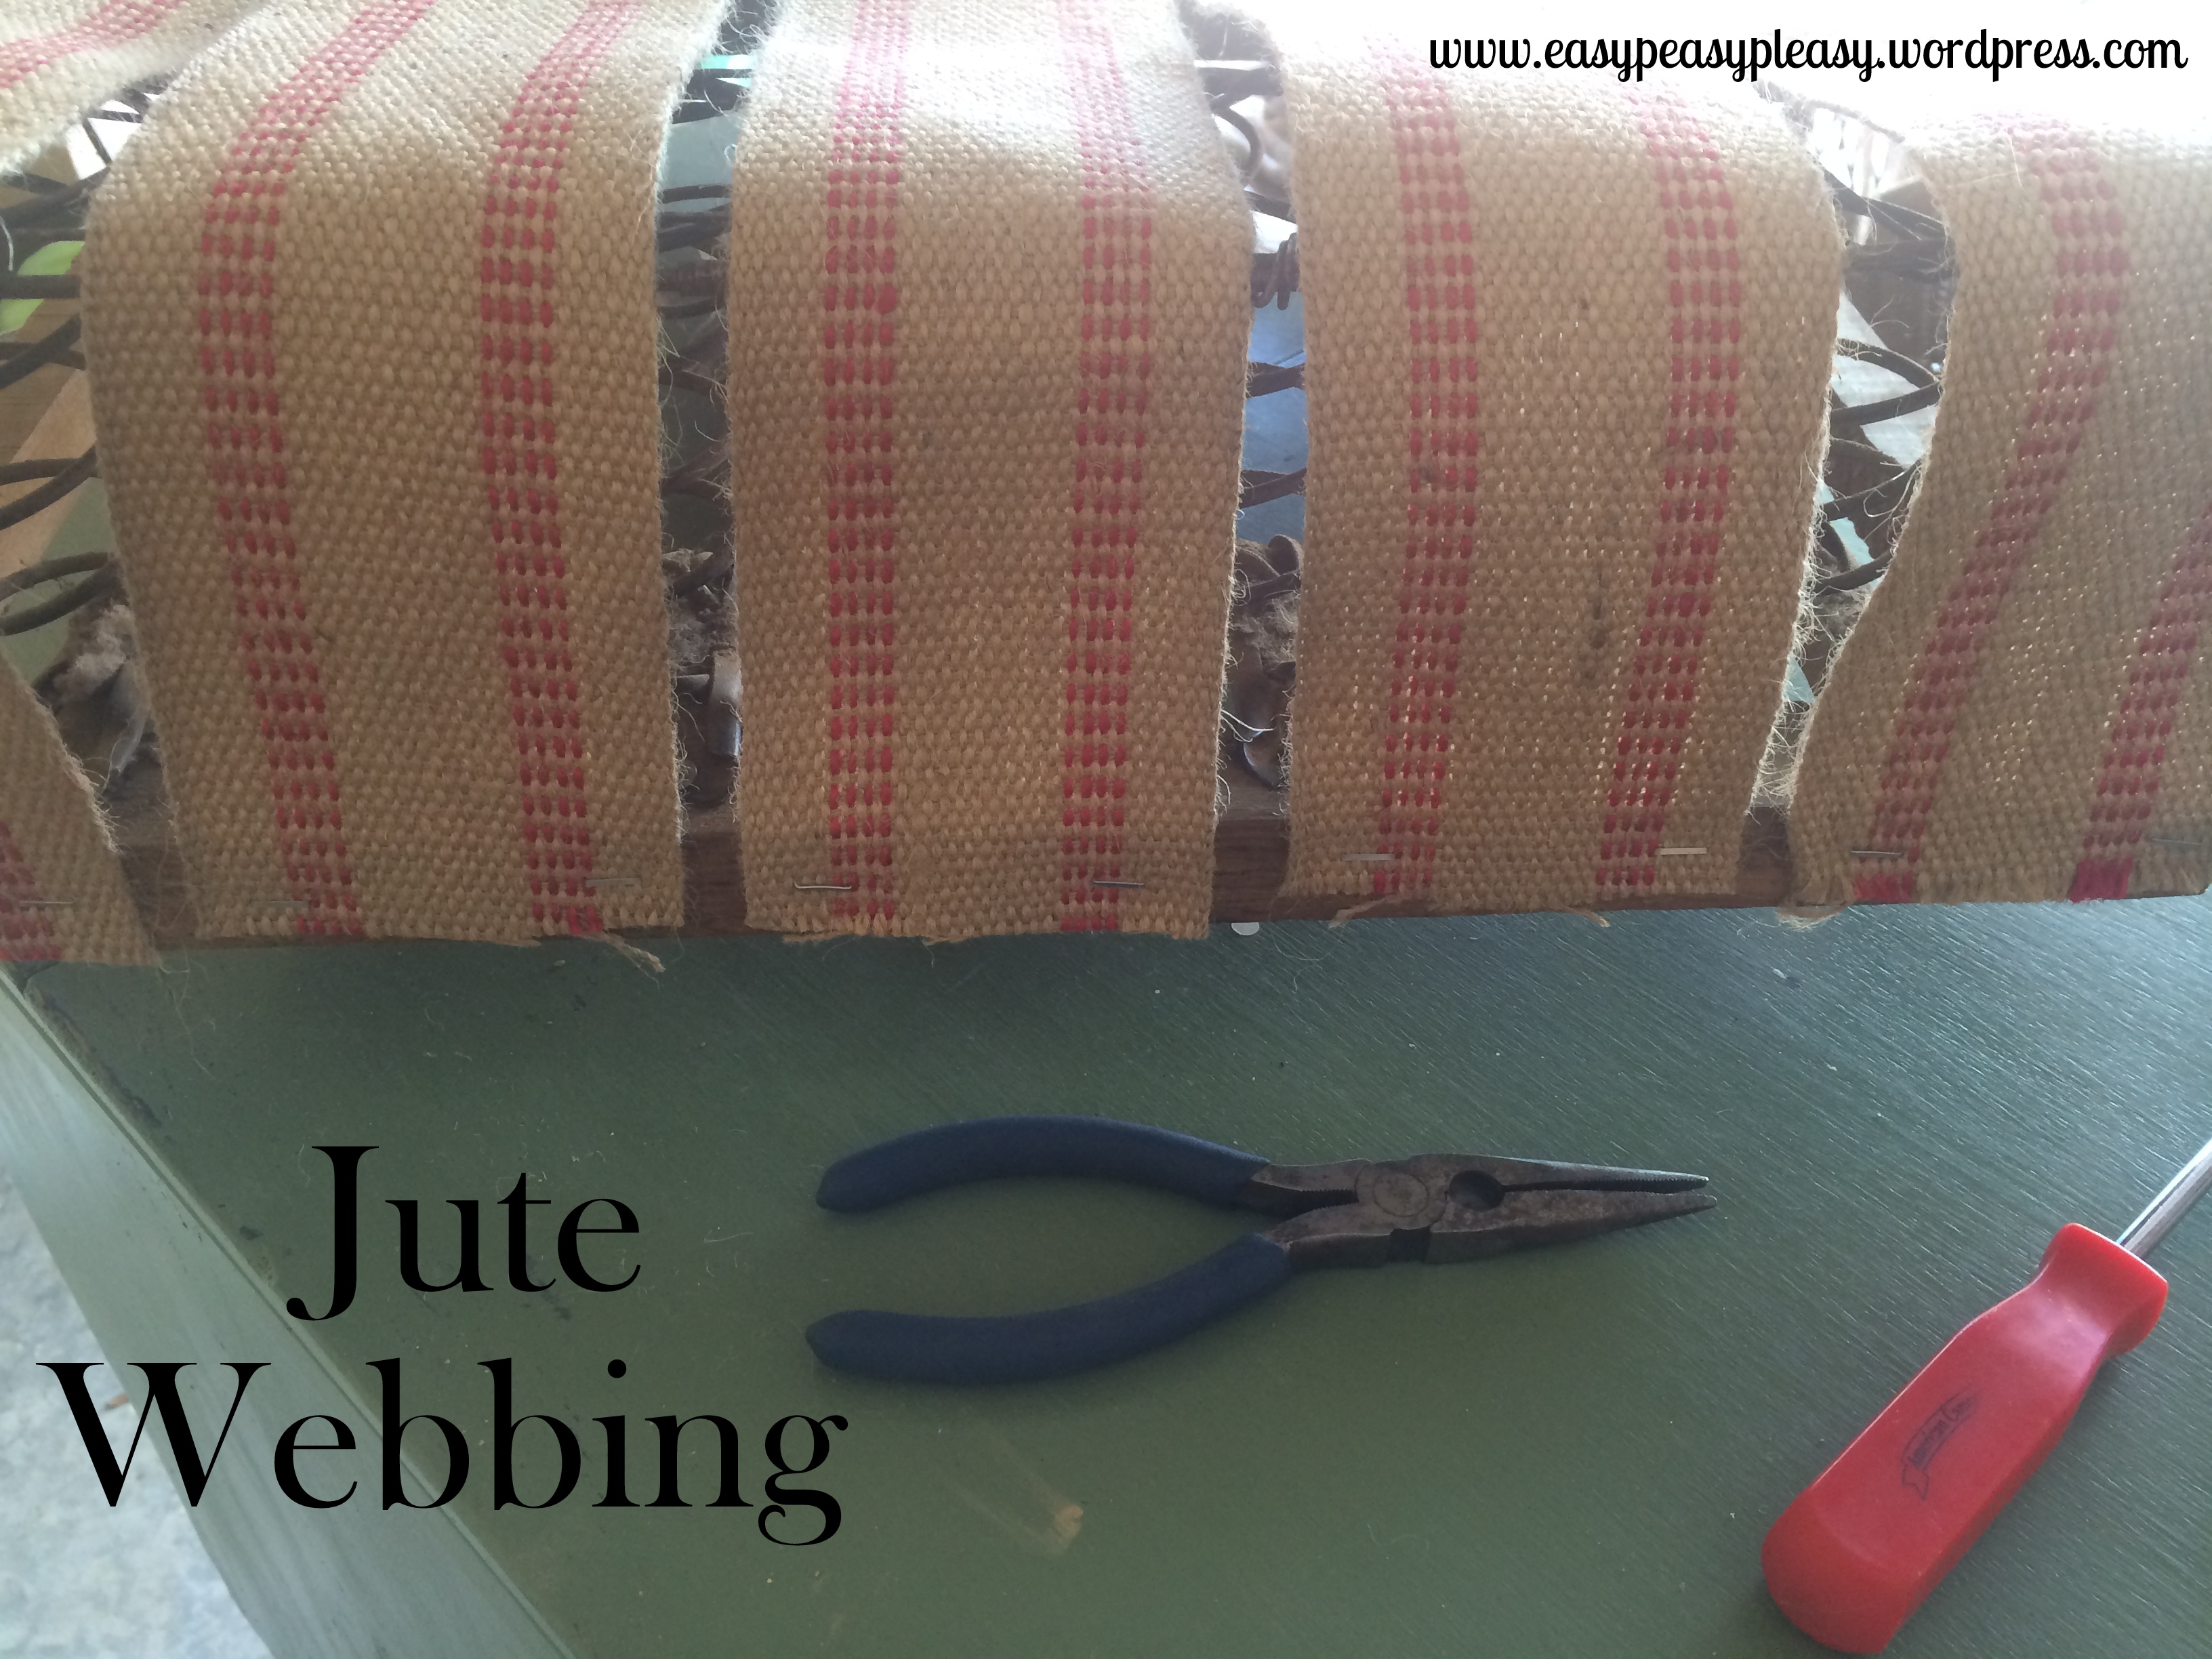 Restoring a spring loaded seat with jute webbing